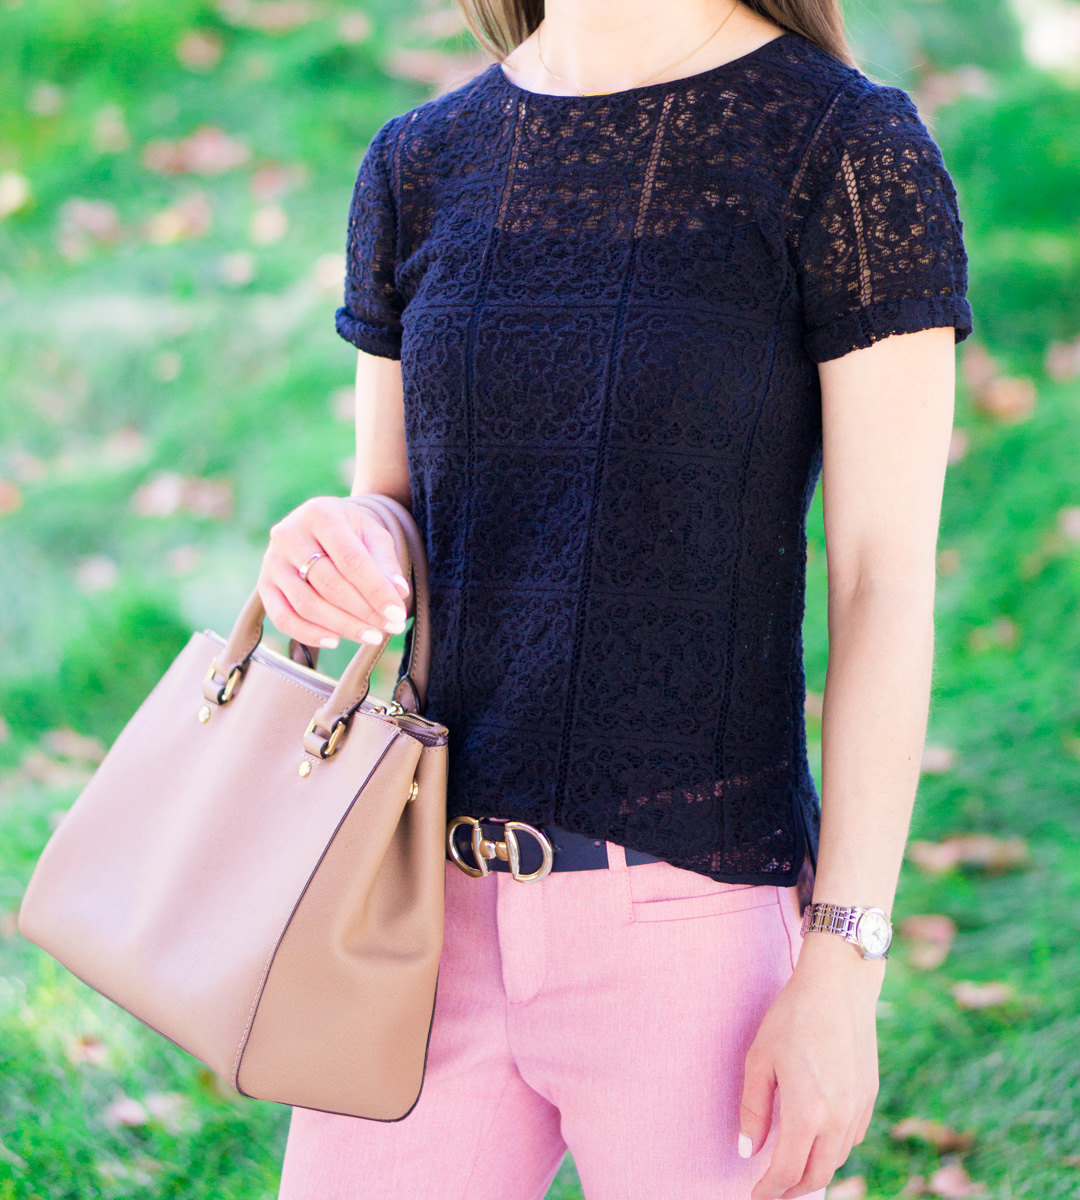 black lace top outfit